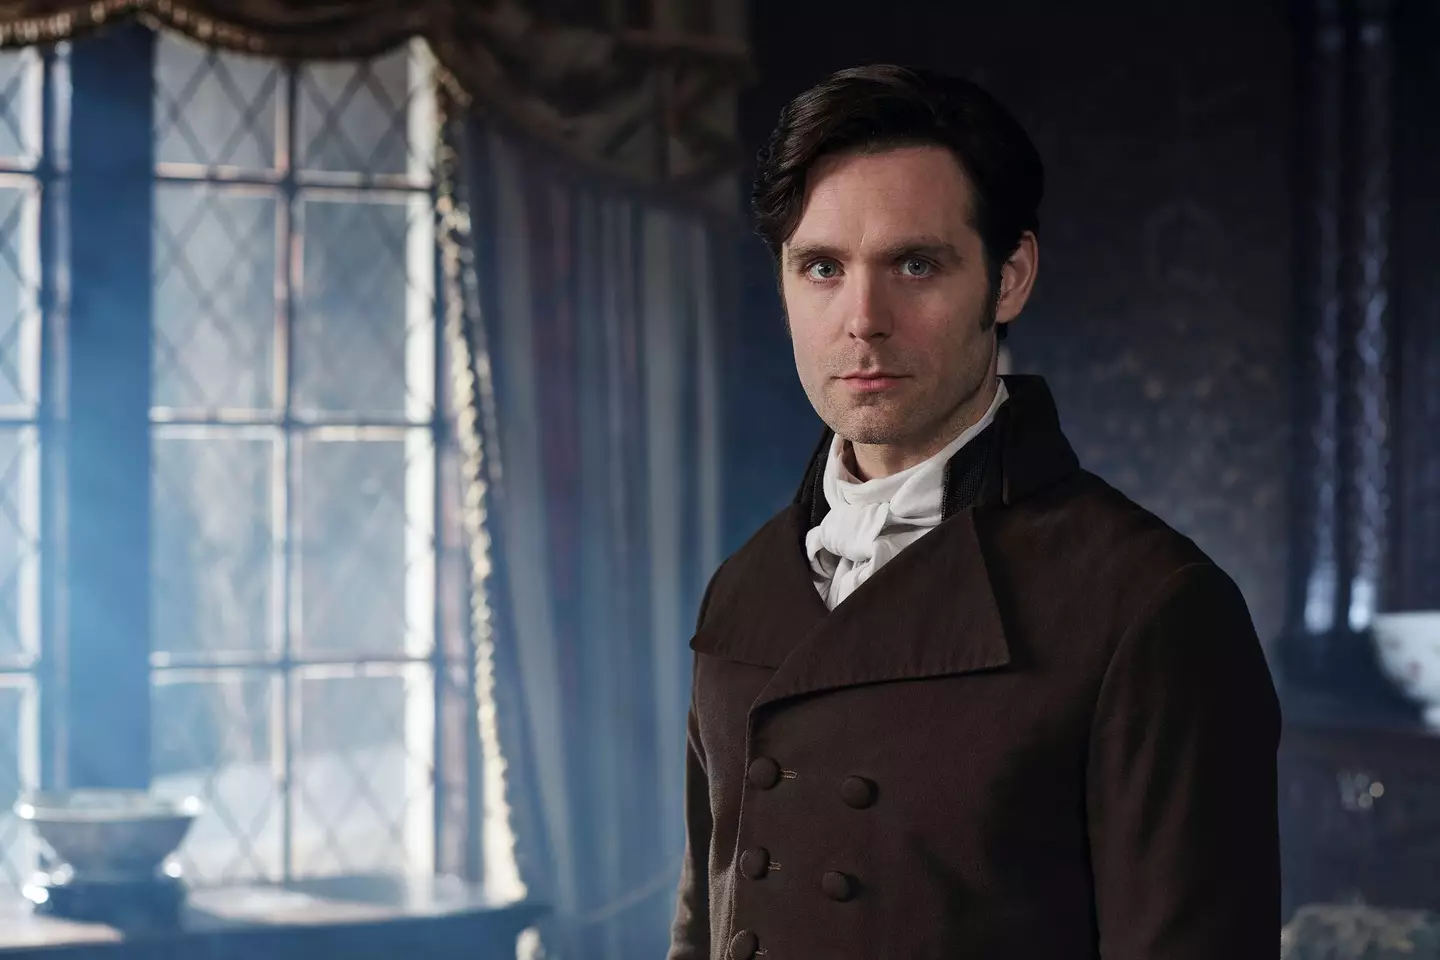 Luke also played Dr Enys in Poldark (